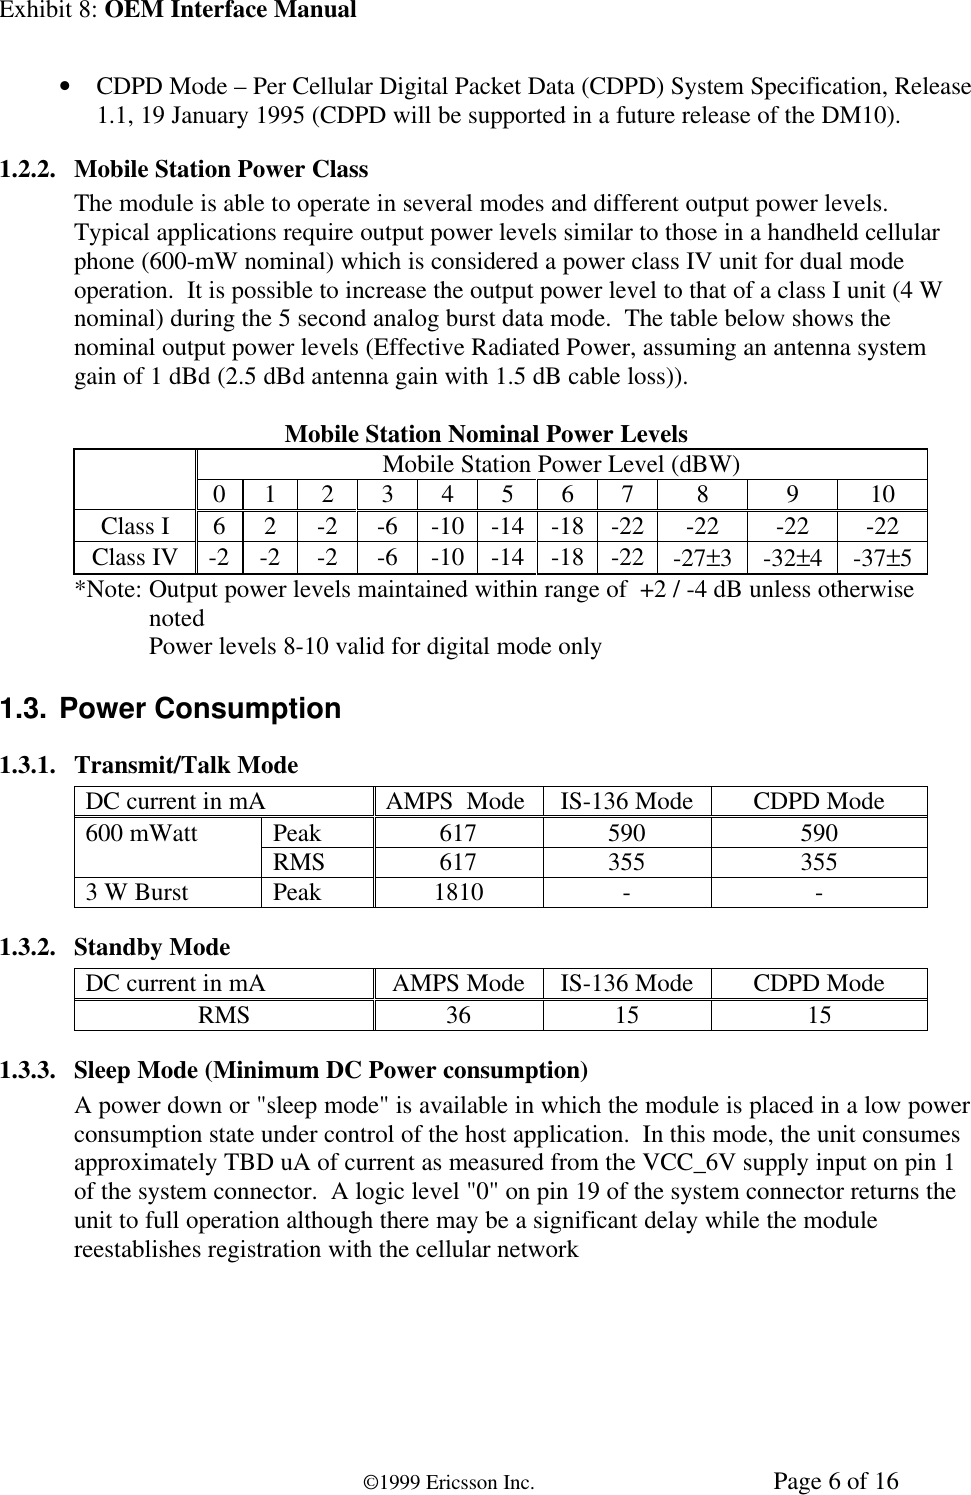 Exhibit 8: OEM Interface Manual©1999 Ericsson Inc. Page 6 of 16• CDPD Mode – Per Cellular Digital Packet Data (CDPD) System Specification, Release1.1, 19 January 1995 (CDPD will be supported in a future release of the DM10).1.2.2. Mobile Station Power ClassThe module is able to operate in several modes and different output power levels.Typical applications require output power levels similar to those in a handheld cellularphone (600-mW nominal) which is considered a power class IV unit for dual modeoperation.  It is possible to increase the output power level to that of a class I unit (4 Wnominal) during the 5 second analog burst data mode.  The table below shows thenominal output power levels (Effective Radiated Power, assuming an antenna systemgain of 1 dBd (2.5 dBd antenna gain with 1.5 dB cable loss)).Mobile Station Nominal Power LevelsMobile Station Power Level (dBW)0 1 2 3 4 5 6 7 8 9 10Class I 6 2 -2 -6 -10 -14 -18 -22 -22 -22 -22Class IV -2 -2 -2 -6 -10 -14 -18 -22 -27±3-32±4-37±5*Note: Output power levels maintained within range of  +2 / -4 dB unless otherwisenotedPower levels 8-10 valid for digital mode only1.3. Power Consumption1.3.1. Transmit/Talk ModeDC current in mA AMPS  Mode IS-136 Mode CDPD ModePeak 617 590 590600 mWatt RMS 617 355 3553 W Burst Peak 1810 - -1.3.2. Standby ModeDC current in mA AMPS Mode IS-136 Mode CDPD ModeRMS 36 15 151.3.3. Sleep Mode (Minimum DC Power consumption)A power down or &quot;sleep mode&quot; is available in which the module is placed in a low powerconsumption state under control of the host application.  In this mode, the unit consumesapproximately TBD uA of current as measured from the VCC_6V supply input on pin 1of the system connector.  A logic level &quot;0&quot; on pin 19 of the system connector returns theunit to full operation although there may be a significant delay while the modulereestablishes registration with the cellular network